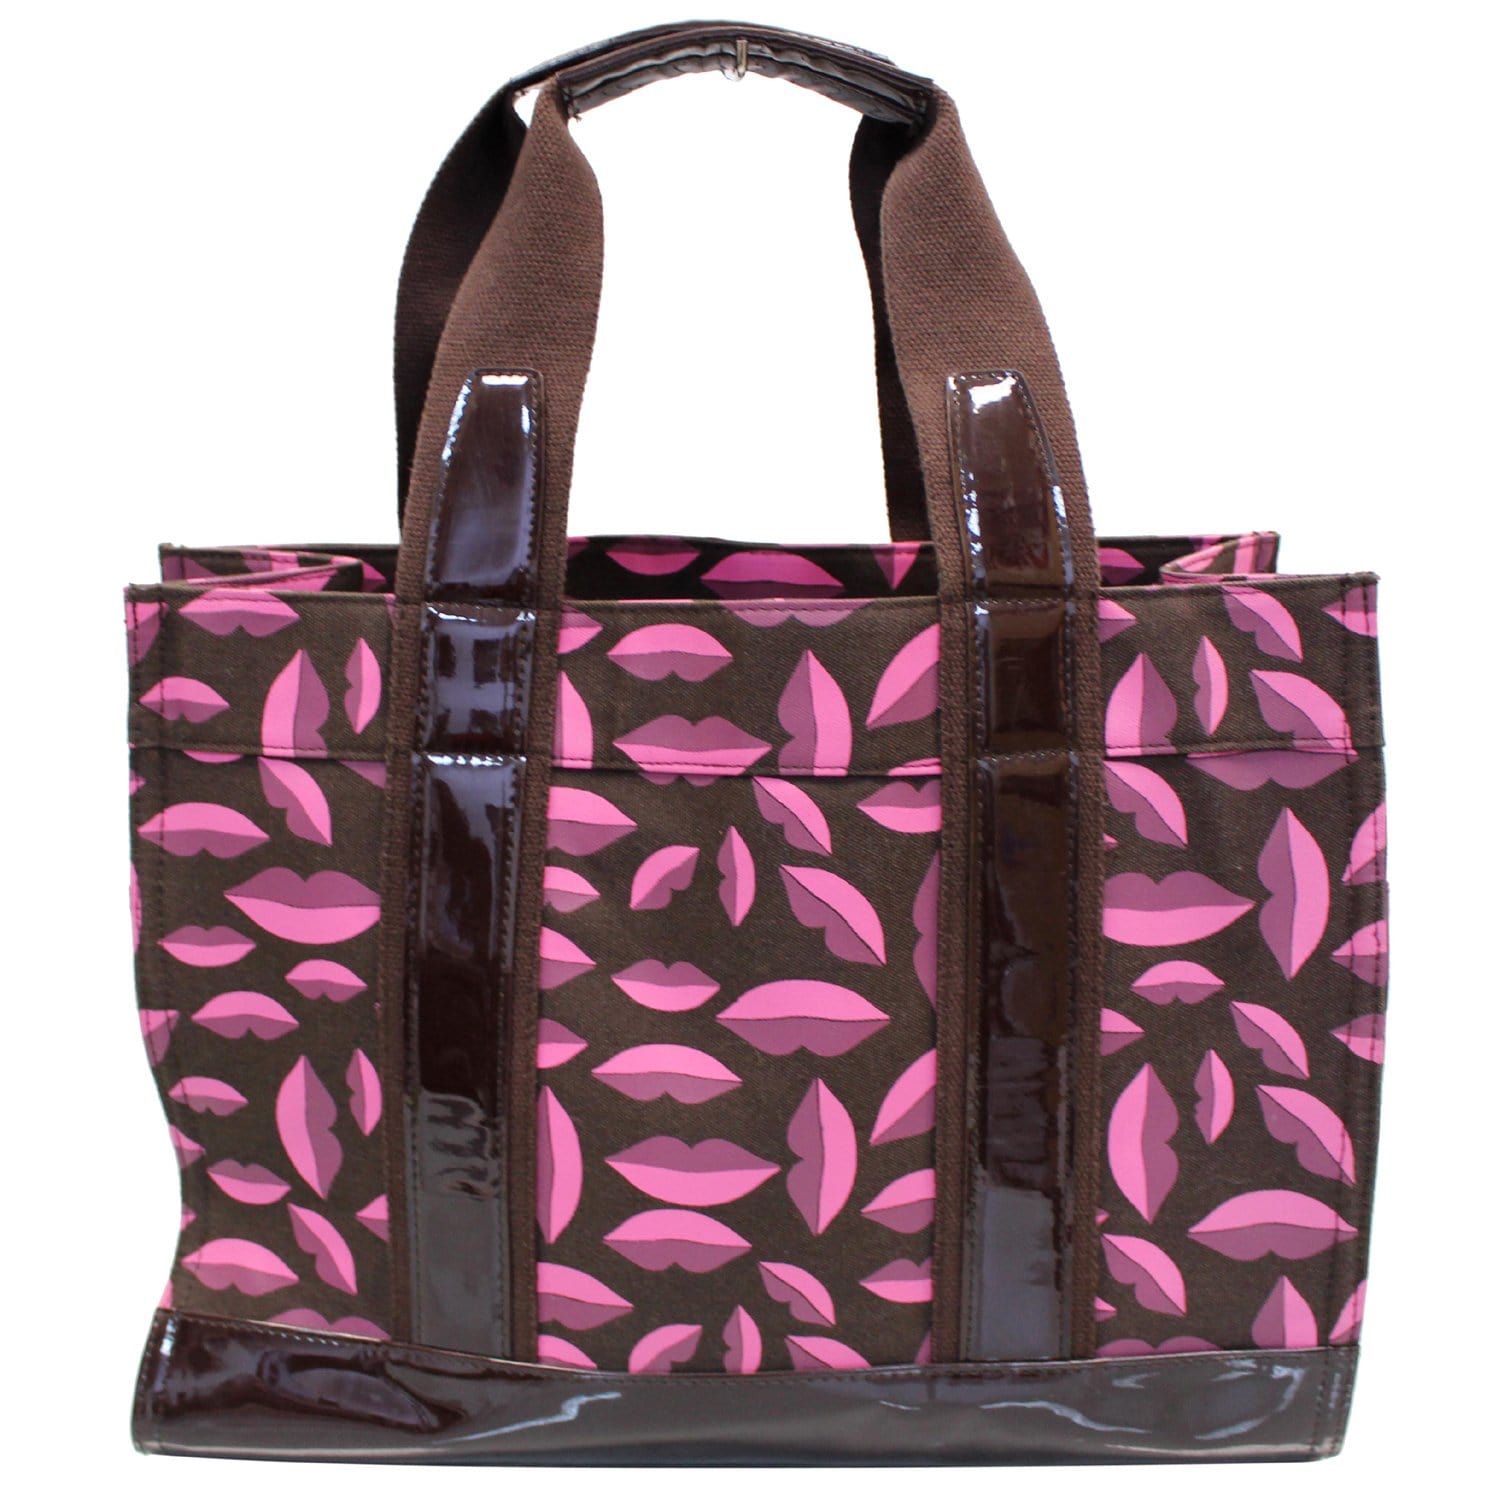 Shop Tory Burch Leather Elegant Style Totes by Lollipopkids